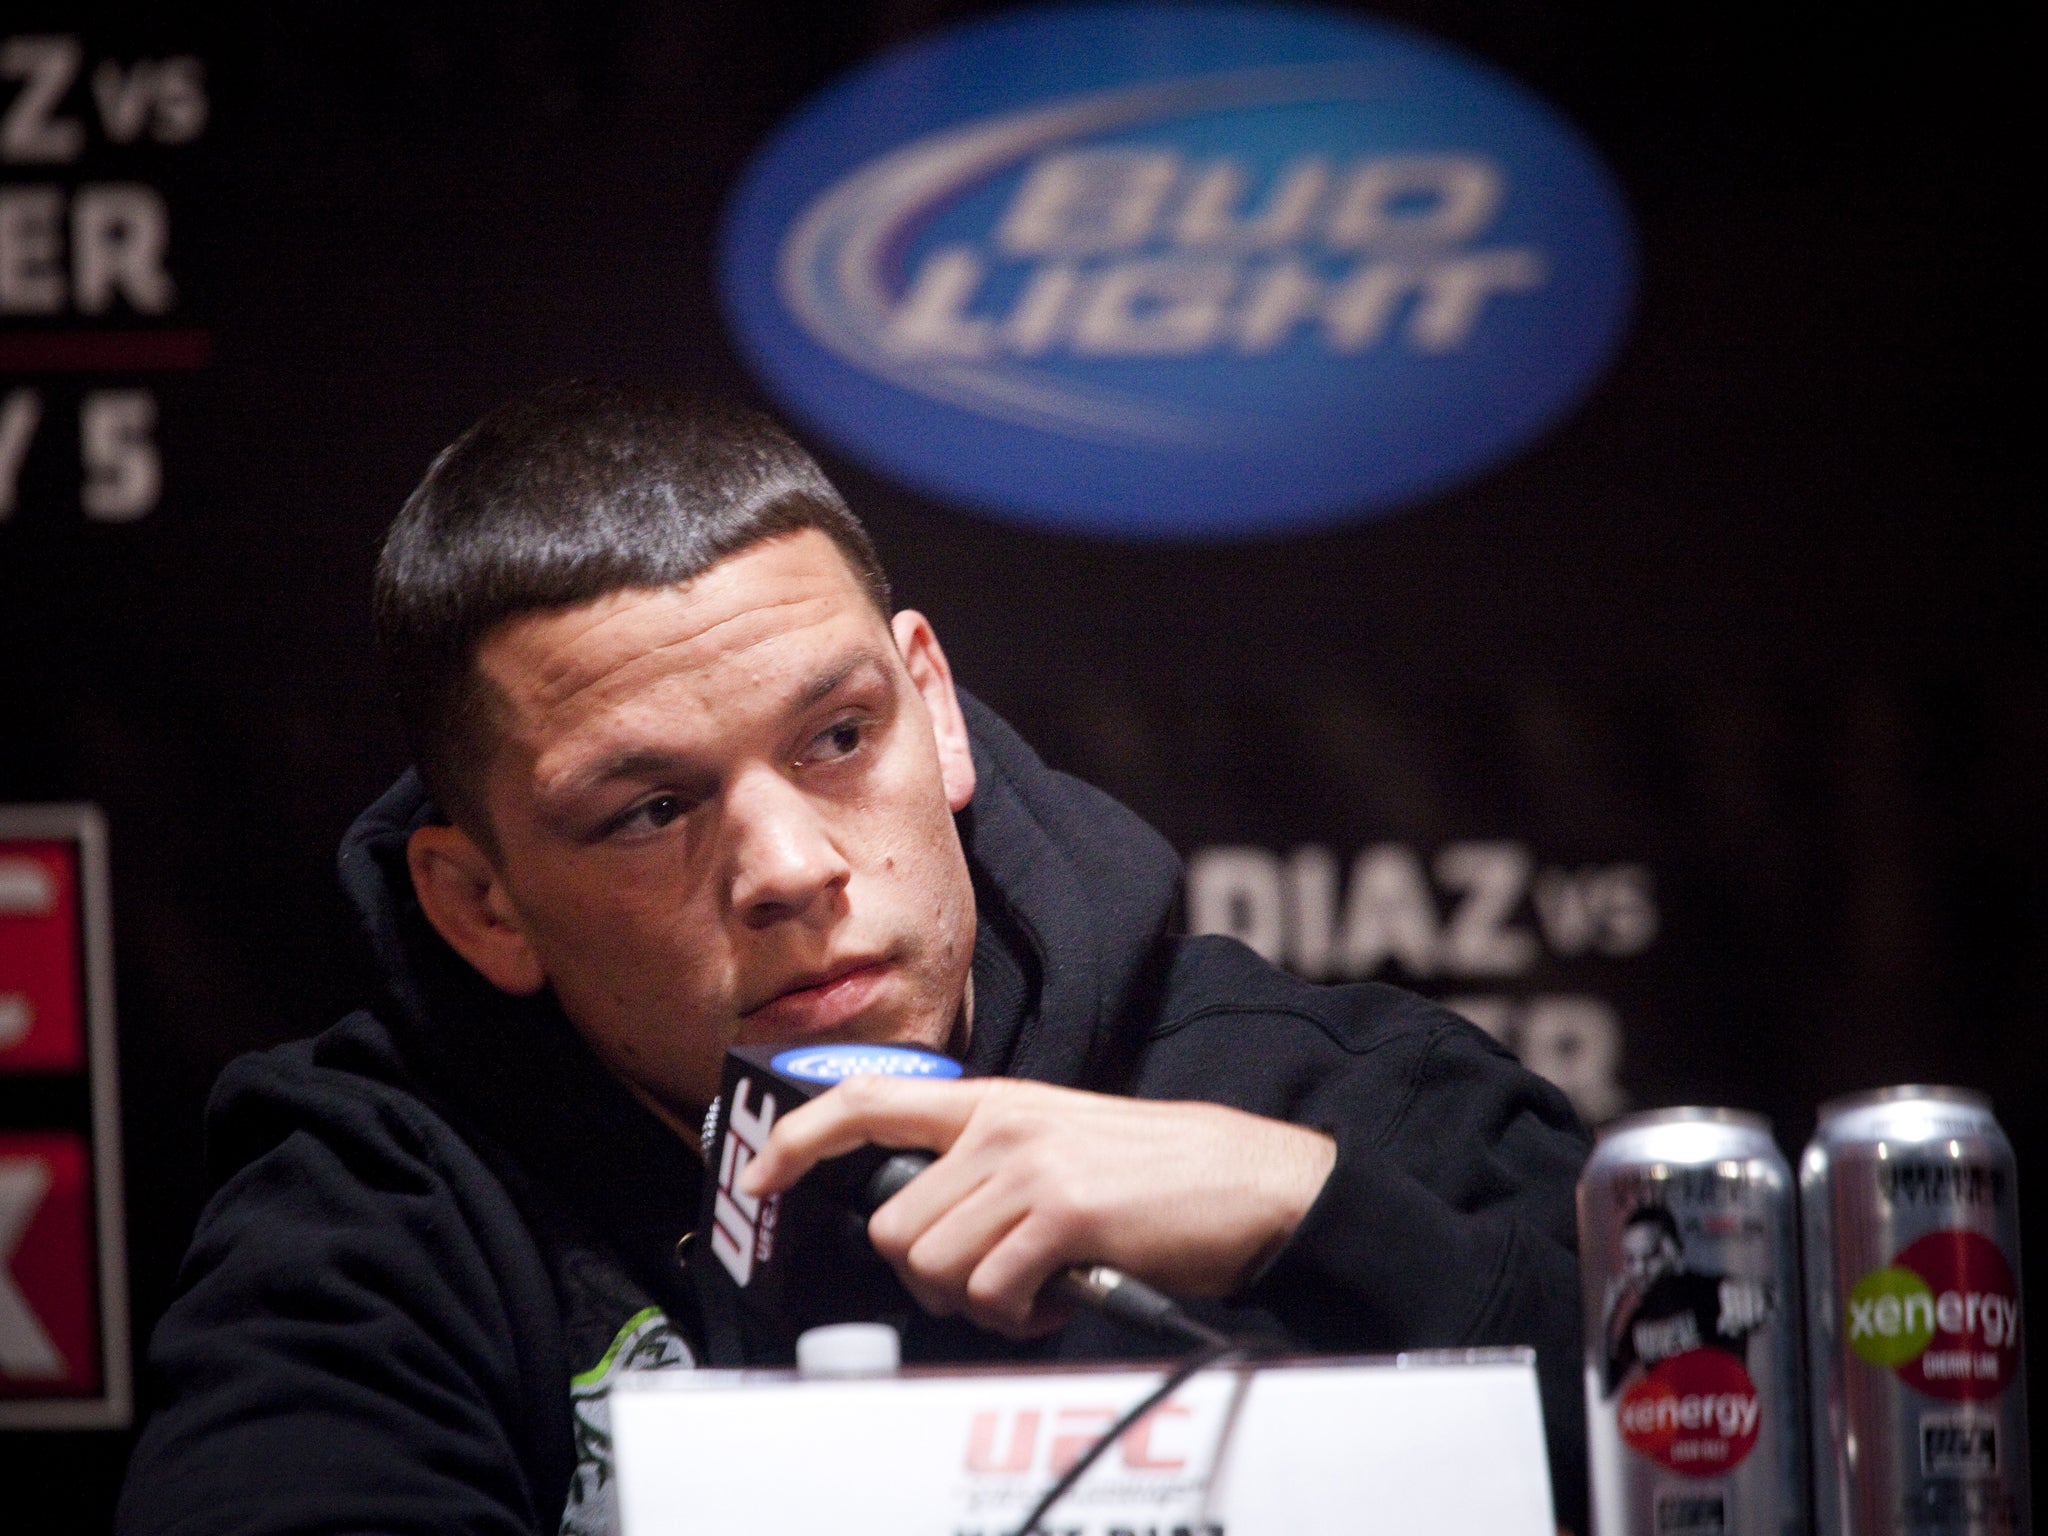 Nate Diaz proved triumphant in The Ultimate Fighter finale by defeating Gray Maynard